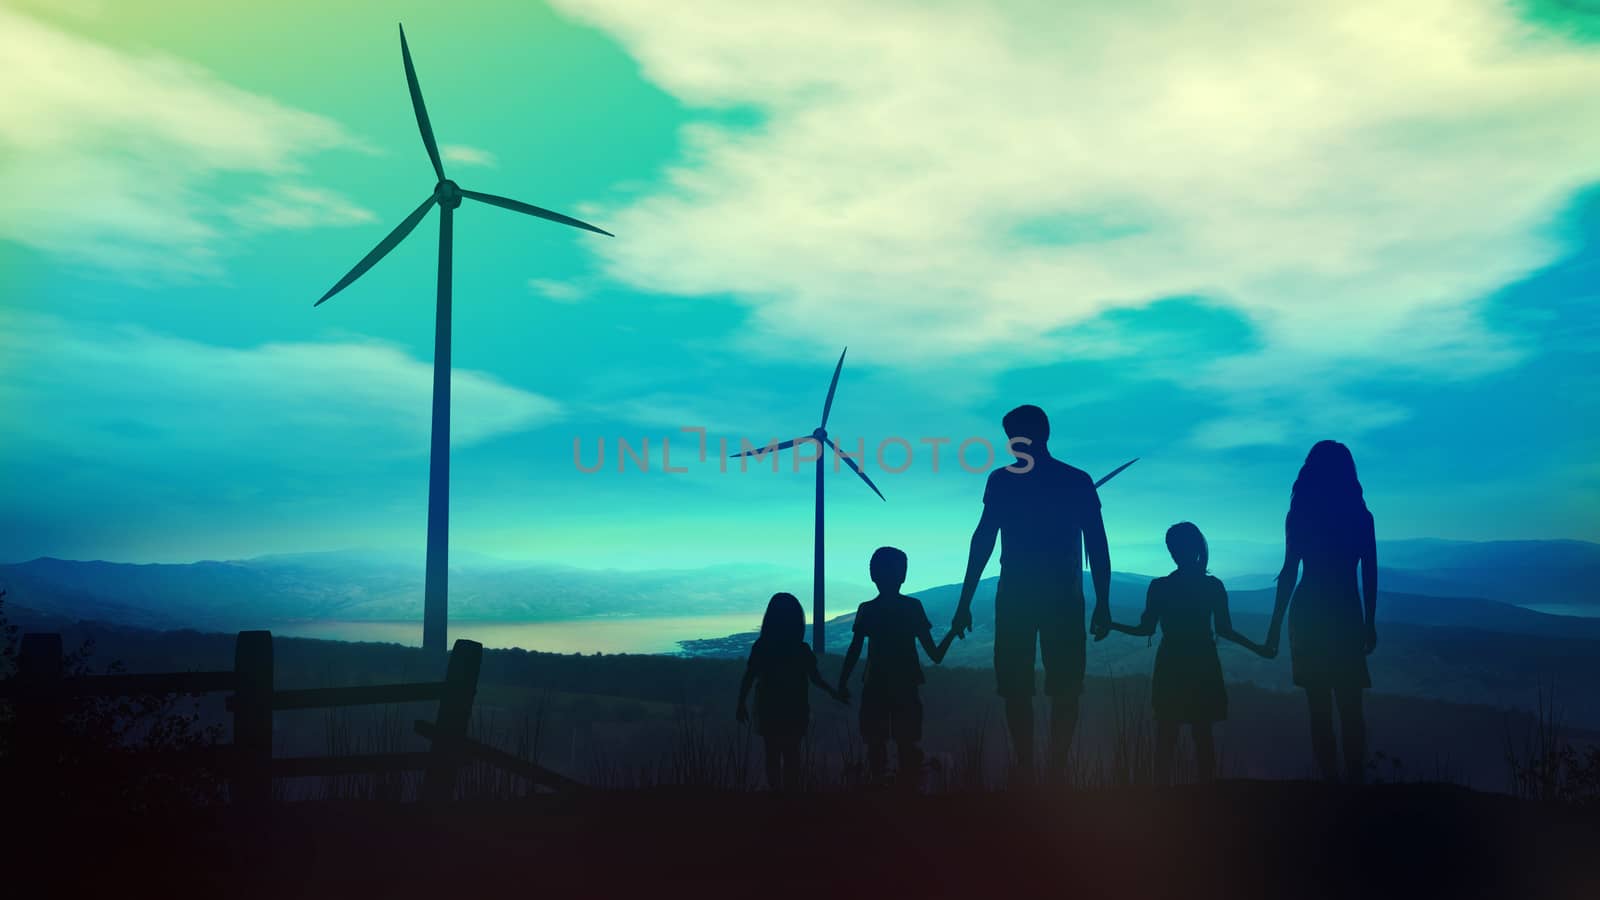 Family with children on the background of wind power plants by ConceptCafe